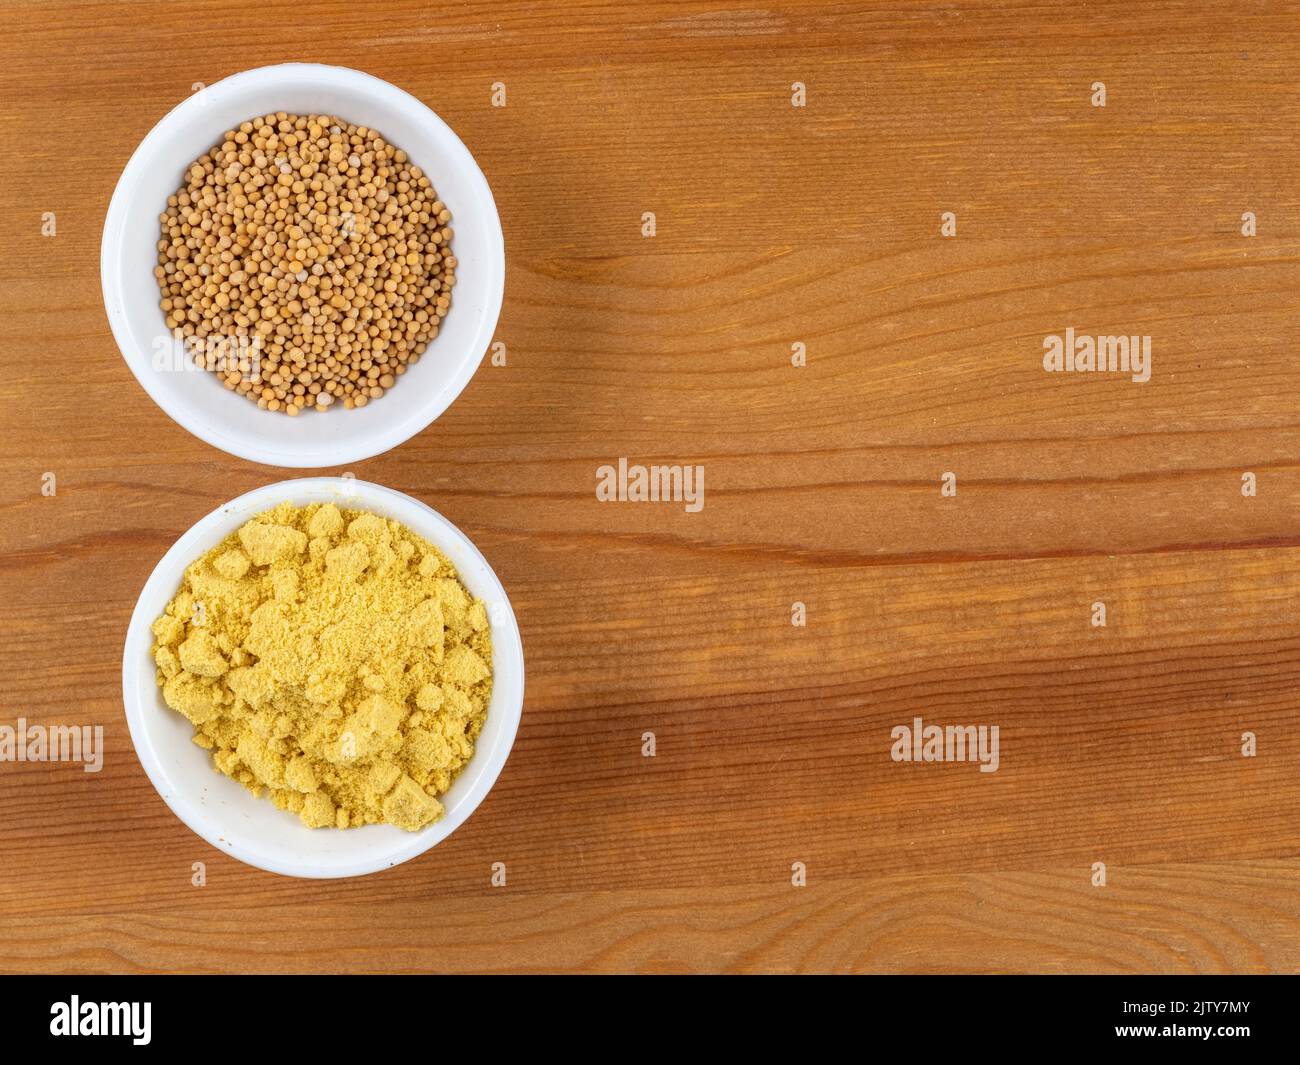 brown Mustard seeds and yellow mustard powder in white bowls on a wooden table Stock Photo